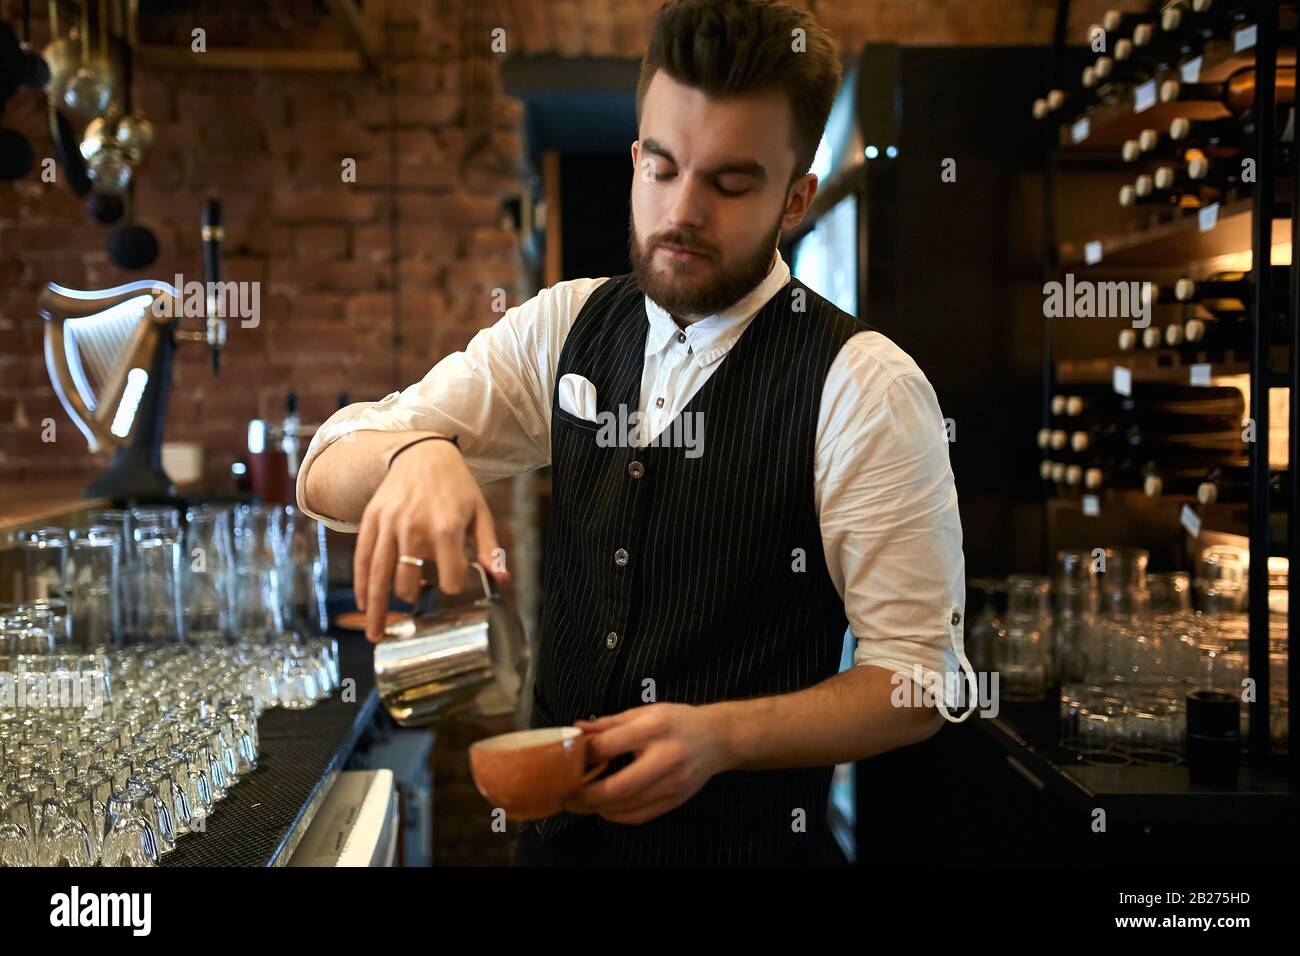 Cafe Happy Stock Photos & Cafe Happy Stock Images - Page 4 - Alamy